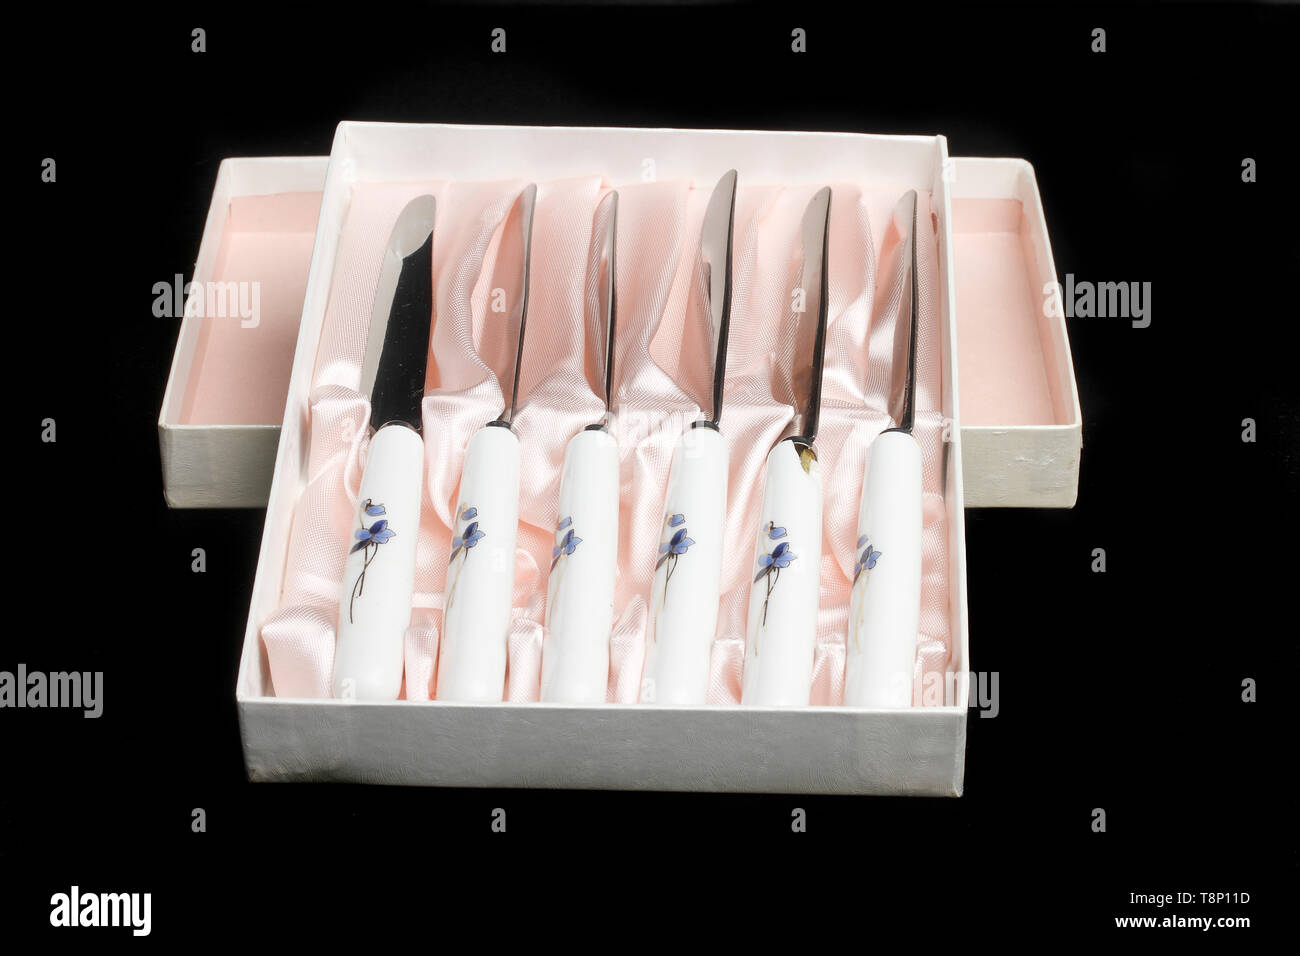 SIMCO Artware Japan decorated knives  51 set stainless steel blades Stock Photo